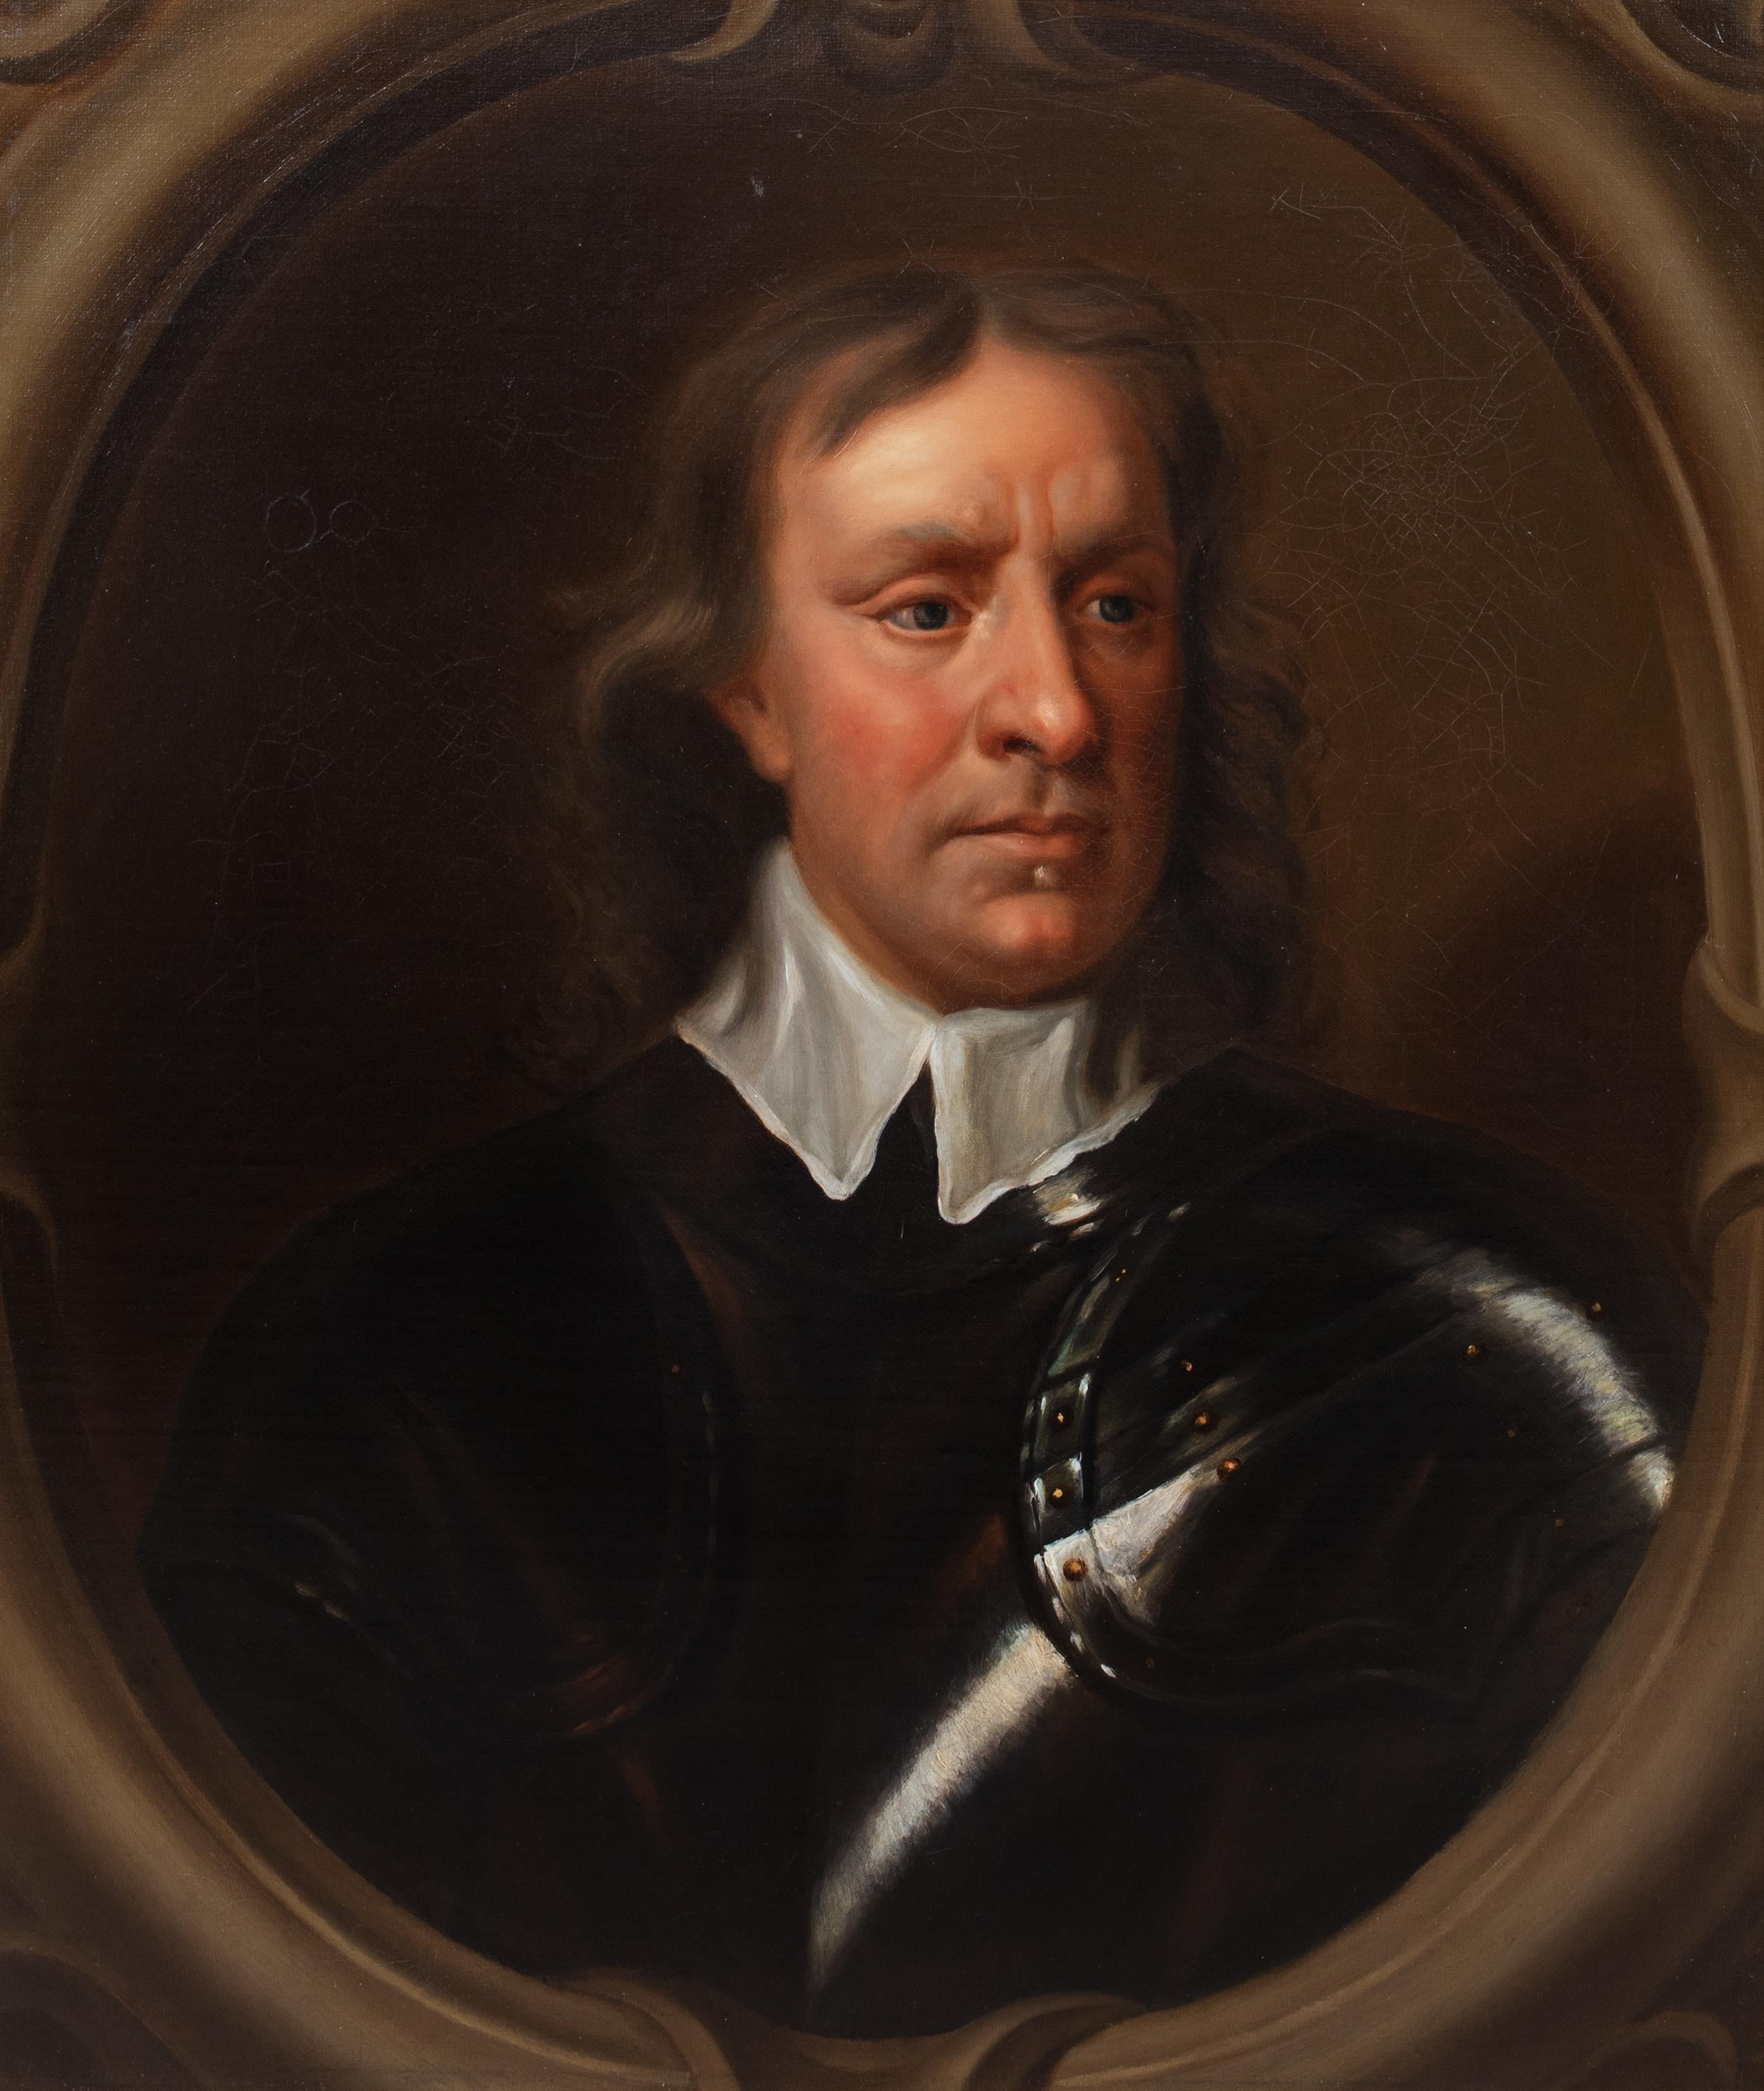 Portrait Of Sir Oliver Cromwell (1599-1658) SIR PETER LELY

after (1599-1658) SIR PETER LELY

Large 17th Century portrait of Sir Oliver Cromwell in armour, oil on canvas. Depicted in a feigned oval wearing armour as Lord Protector circa 1656.